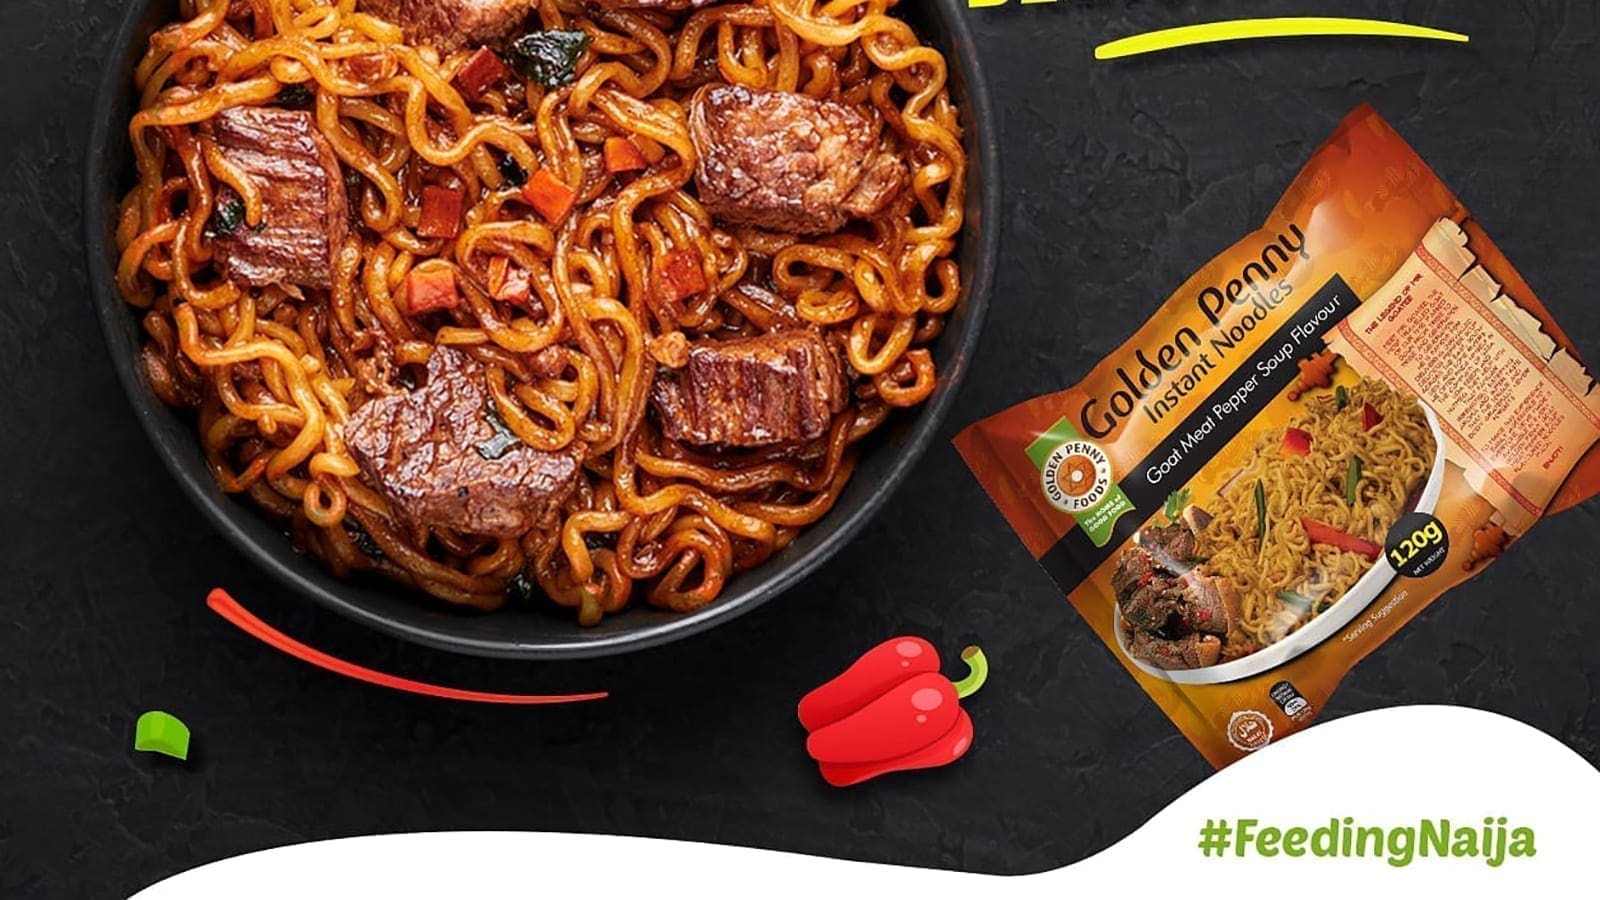 Golden Penny incorporates classic Nigerian goat meat pepper soup flavour into its new noodles